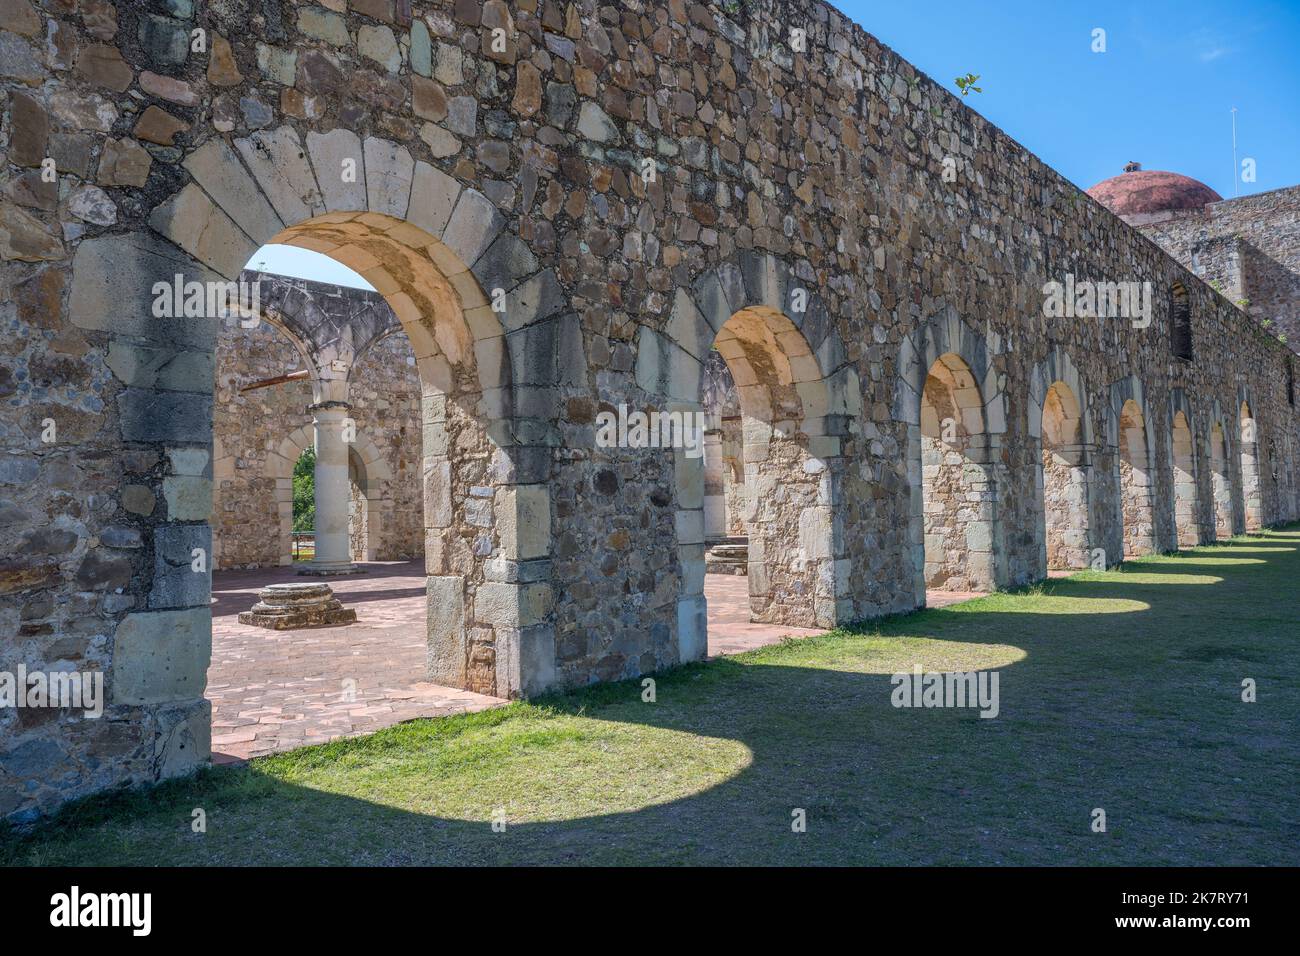 The sun is shining through the arches of the ancient roofless church of Cuilapan de Guerrero, a monastery built in the 16th century by the Spanish in Stock Photo